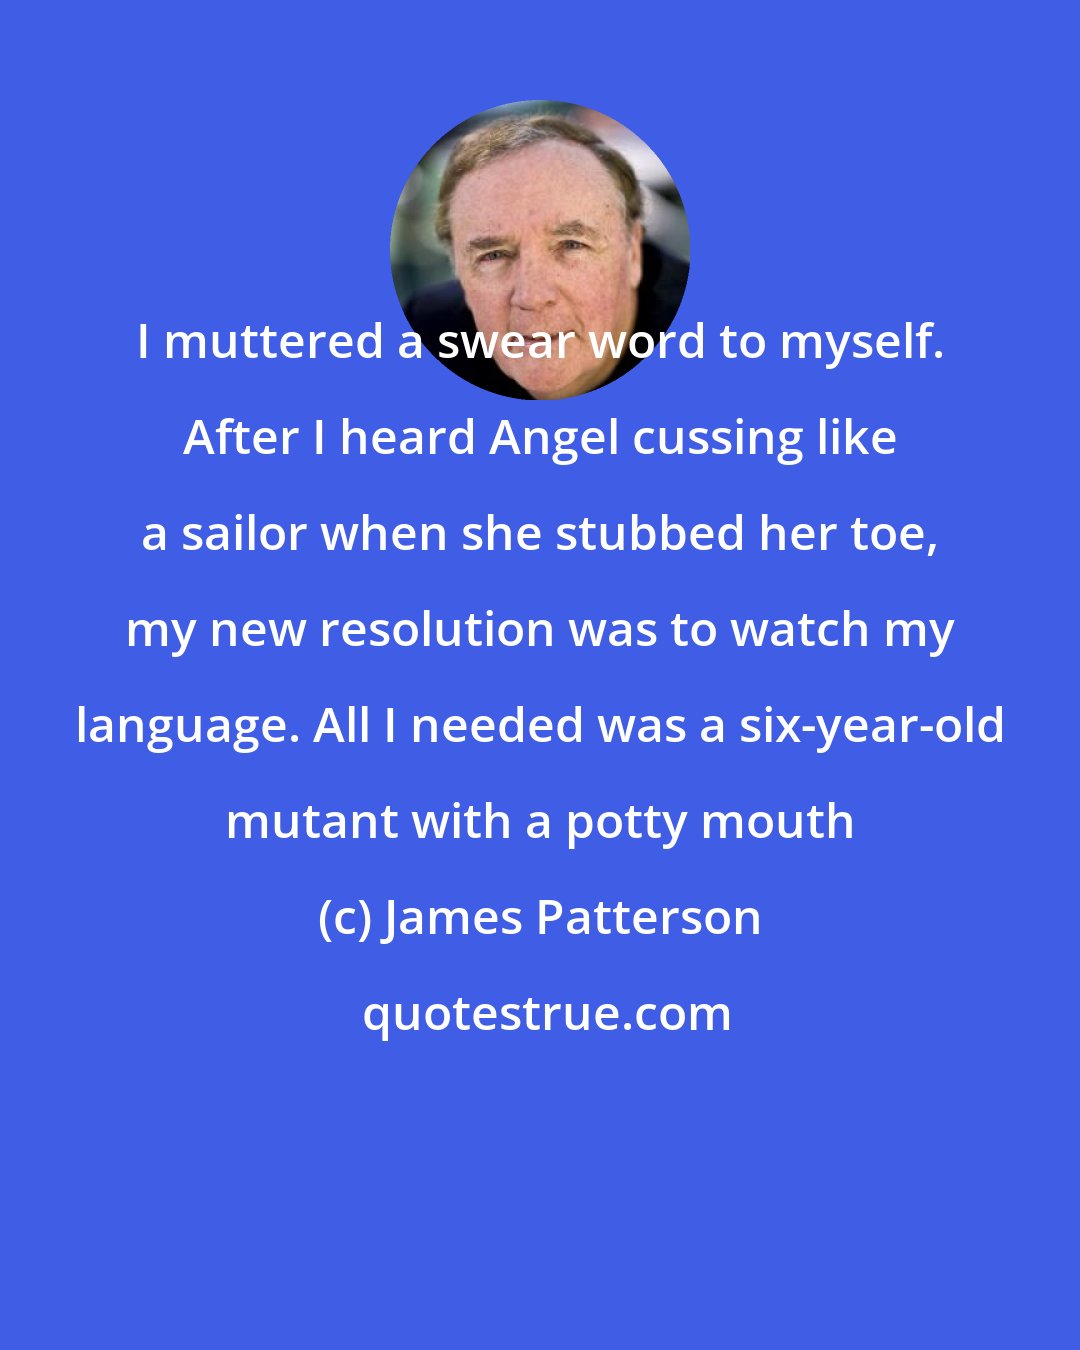 James Patterson: I muttered a swear word to myself. After I heard Angel cussing like a sailor when she stubbed her toe, my new resolution was to watch my language. All I needed was a six-year-old mutant with a potty mouth